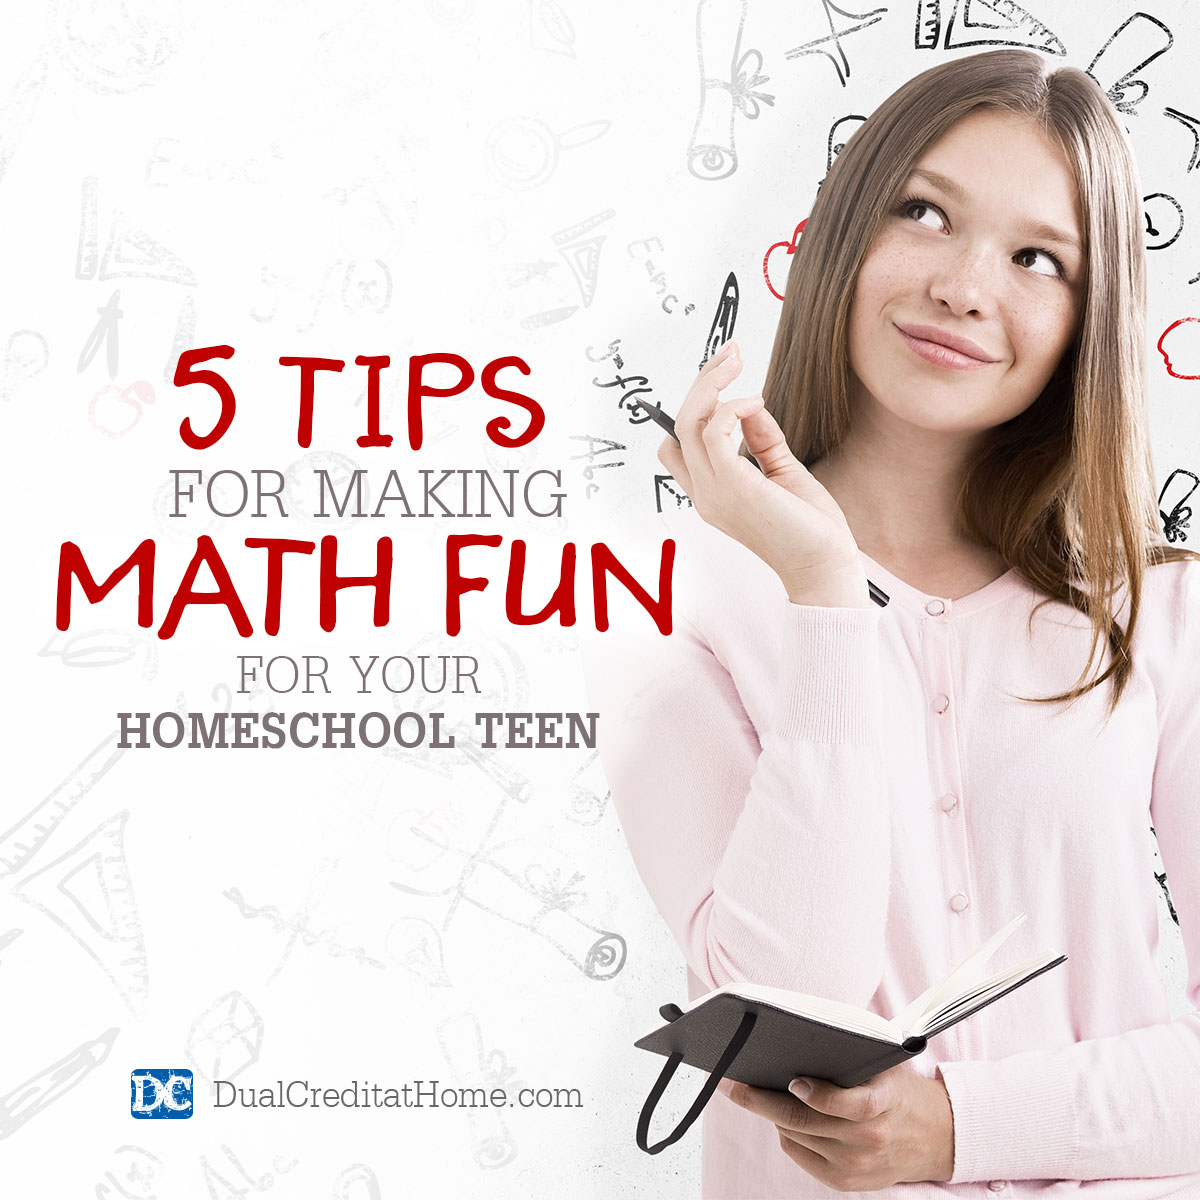 5 Tips for Making Math Fun for Your Homeschool Teen